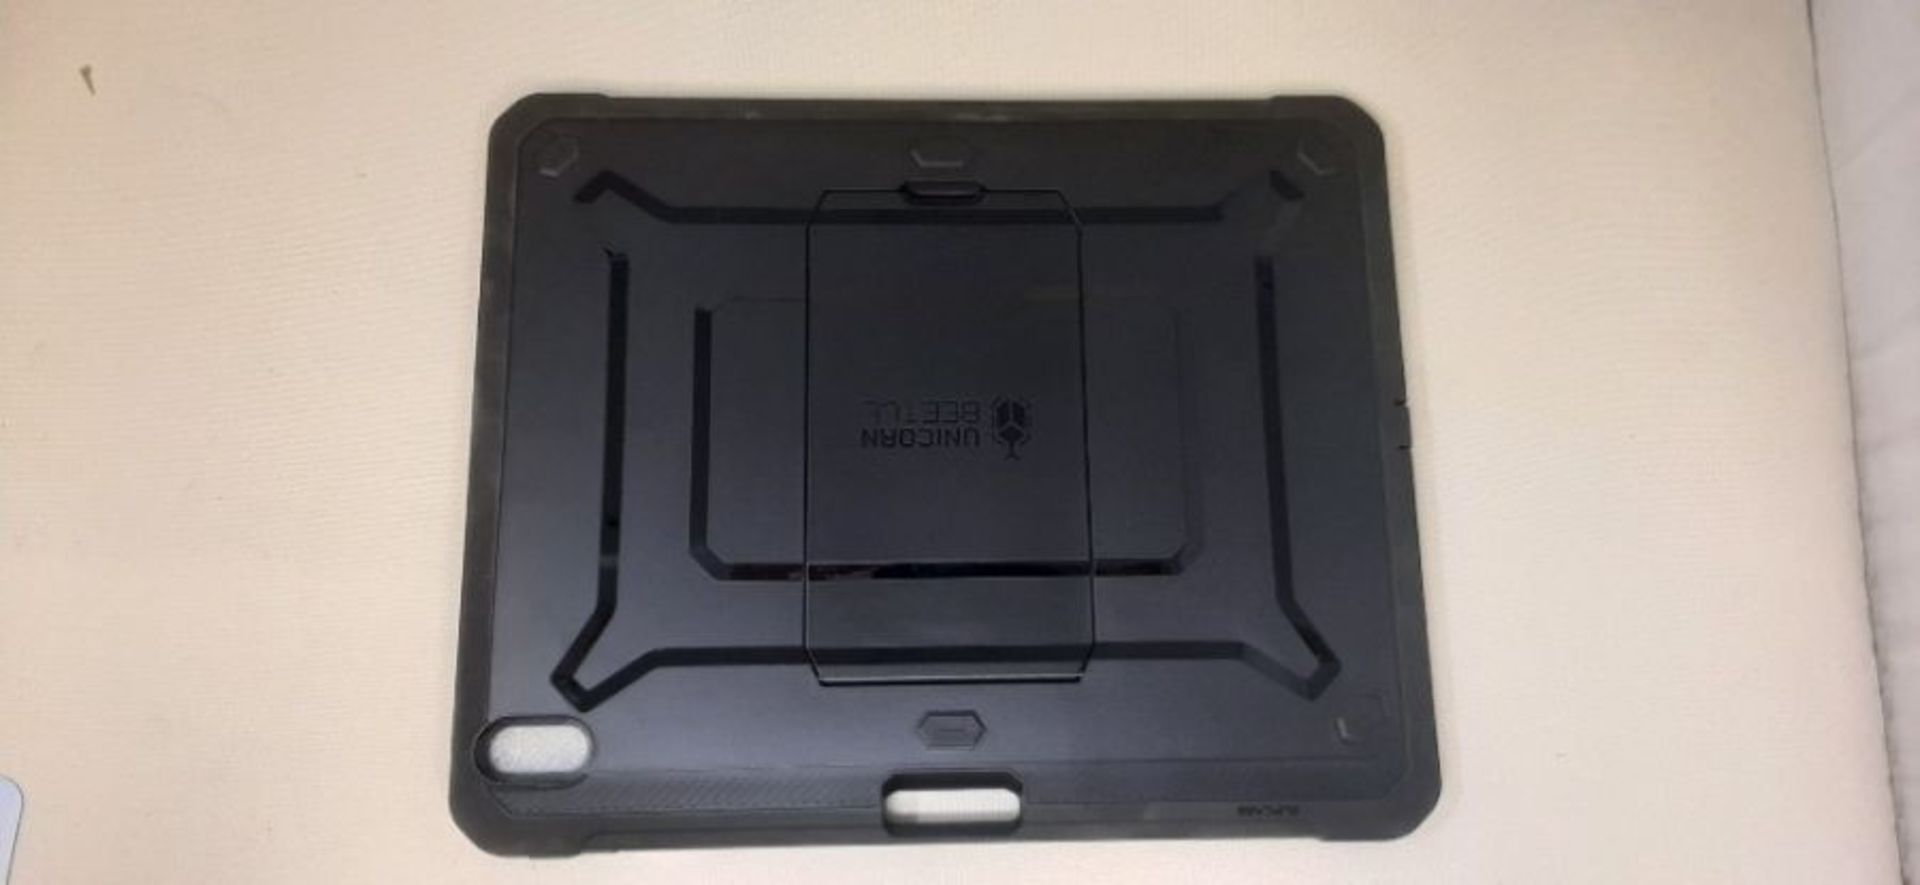 iPad Pro 12.9 Case 2018, SUPCASE Support Pencil Charging with Built-In Screen Protecto - Image 2 of 3